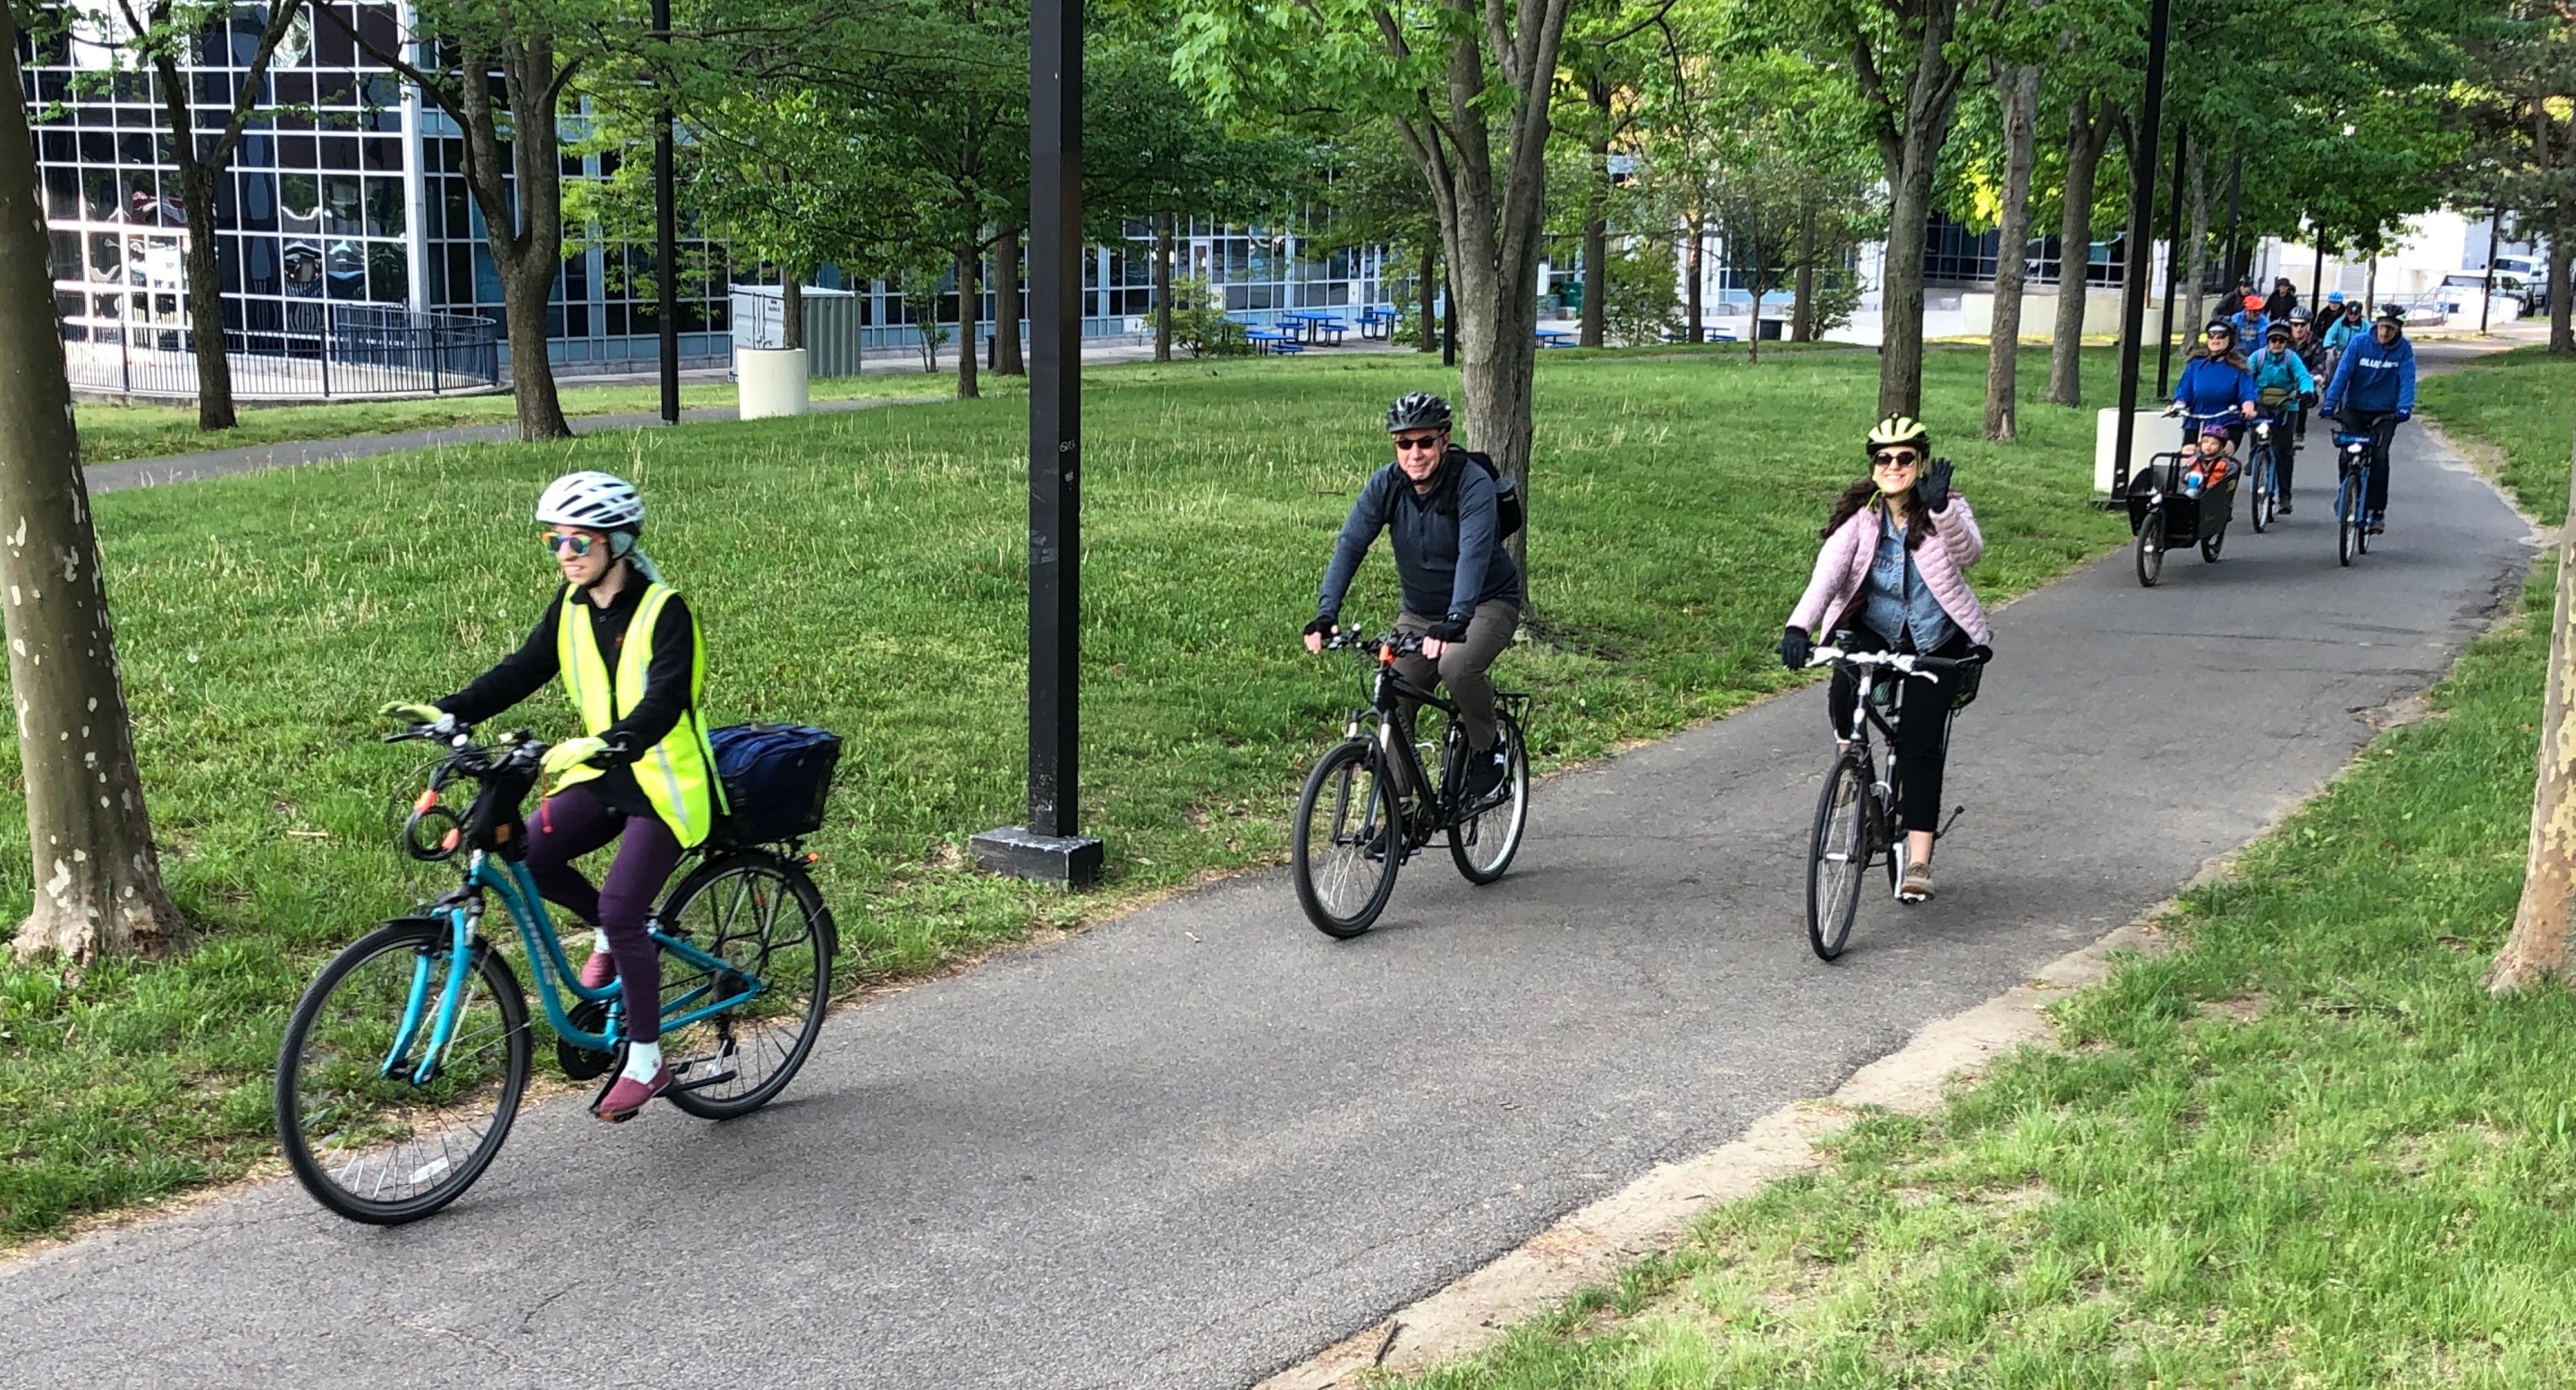 Three people riding bicycles down a paved pathway through a shady park on the SW Corridor. Behind them in the upper right corner is another crowd of people on bikes.